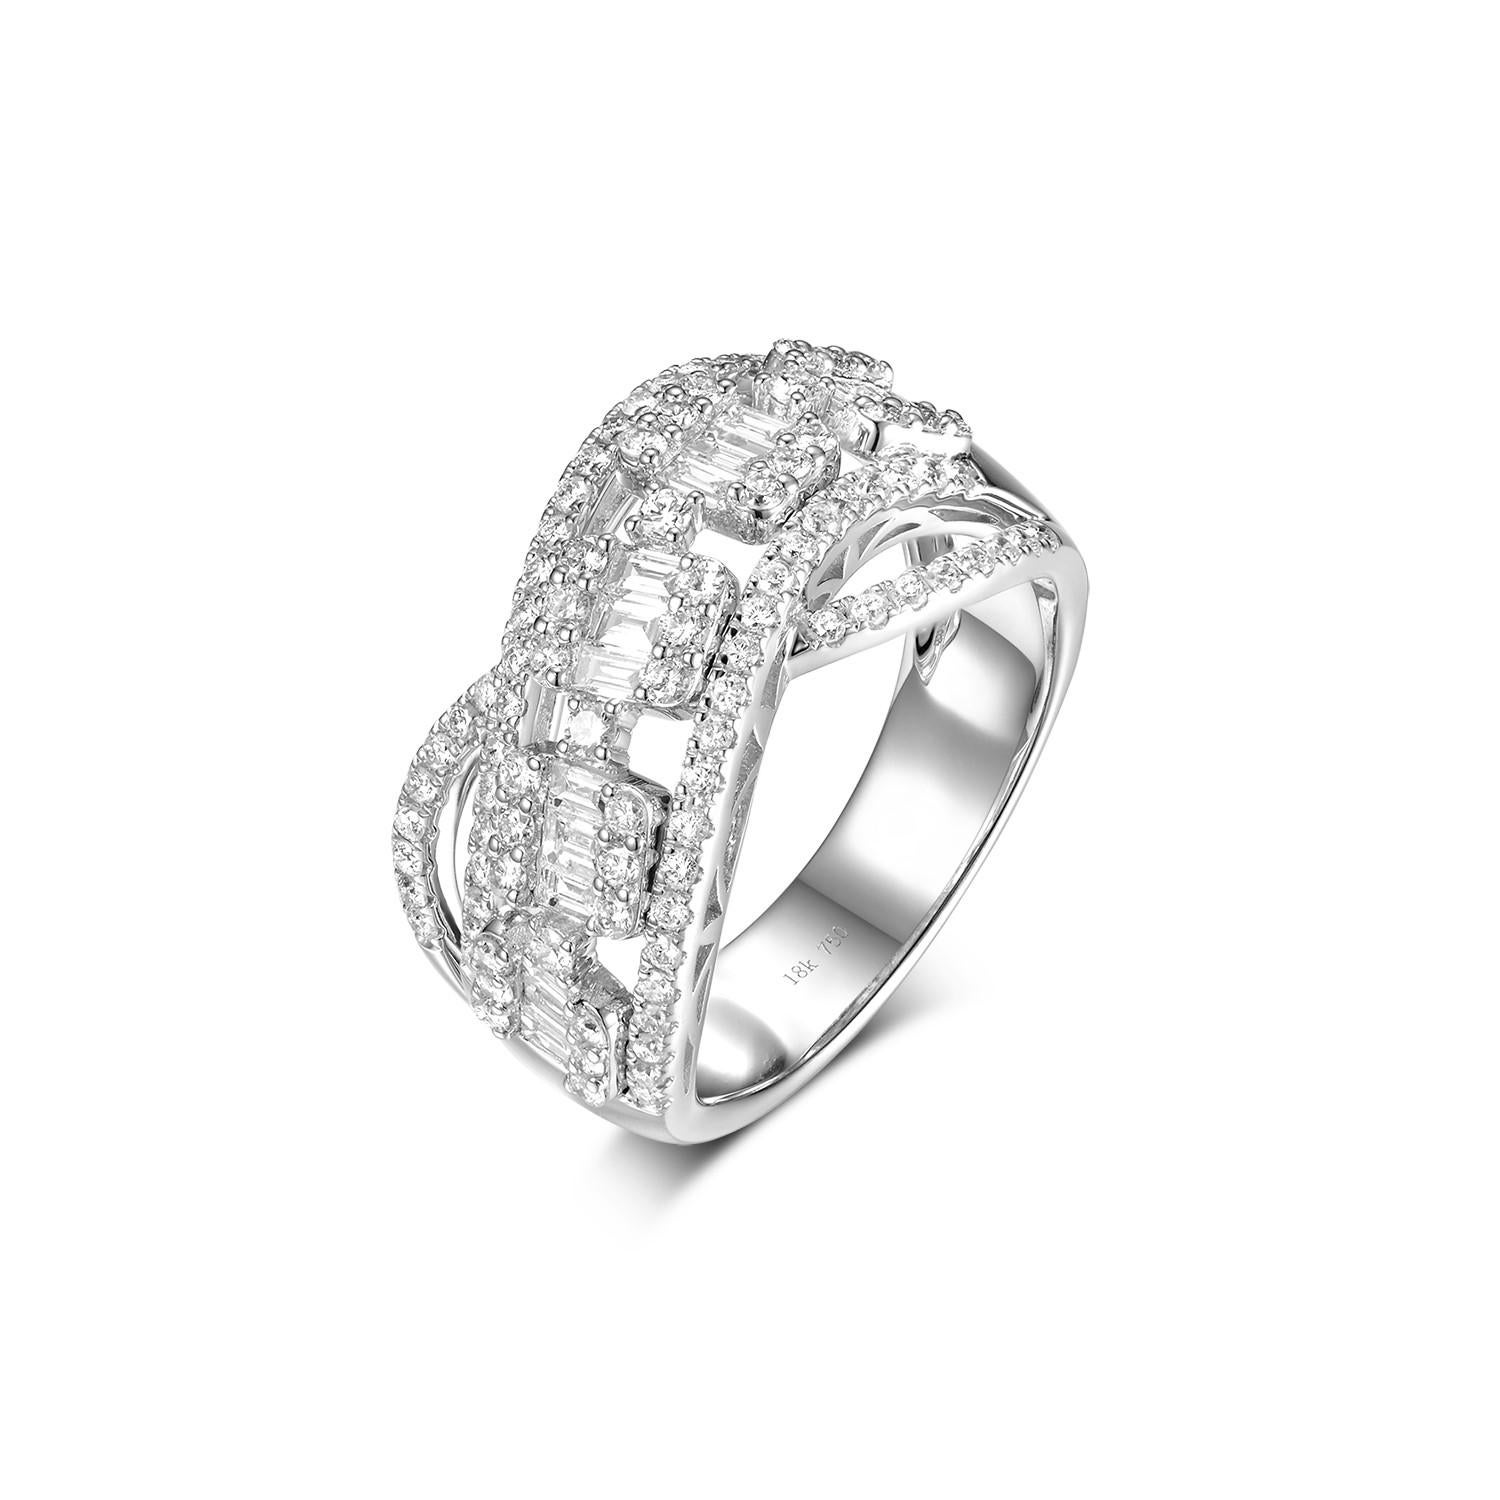 This band ring features taper diamond 0.38 carat and round diamond 0.74 carat.  A simple yet elegant piece.  Truly a special gift for that special someone.

US 7
Resizing is available
Taper Diamond 0.38 carat
Round Diamond 0.74 carat